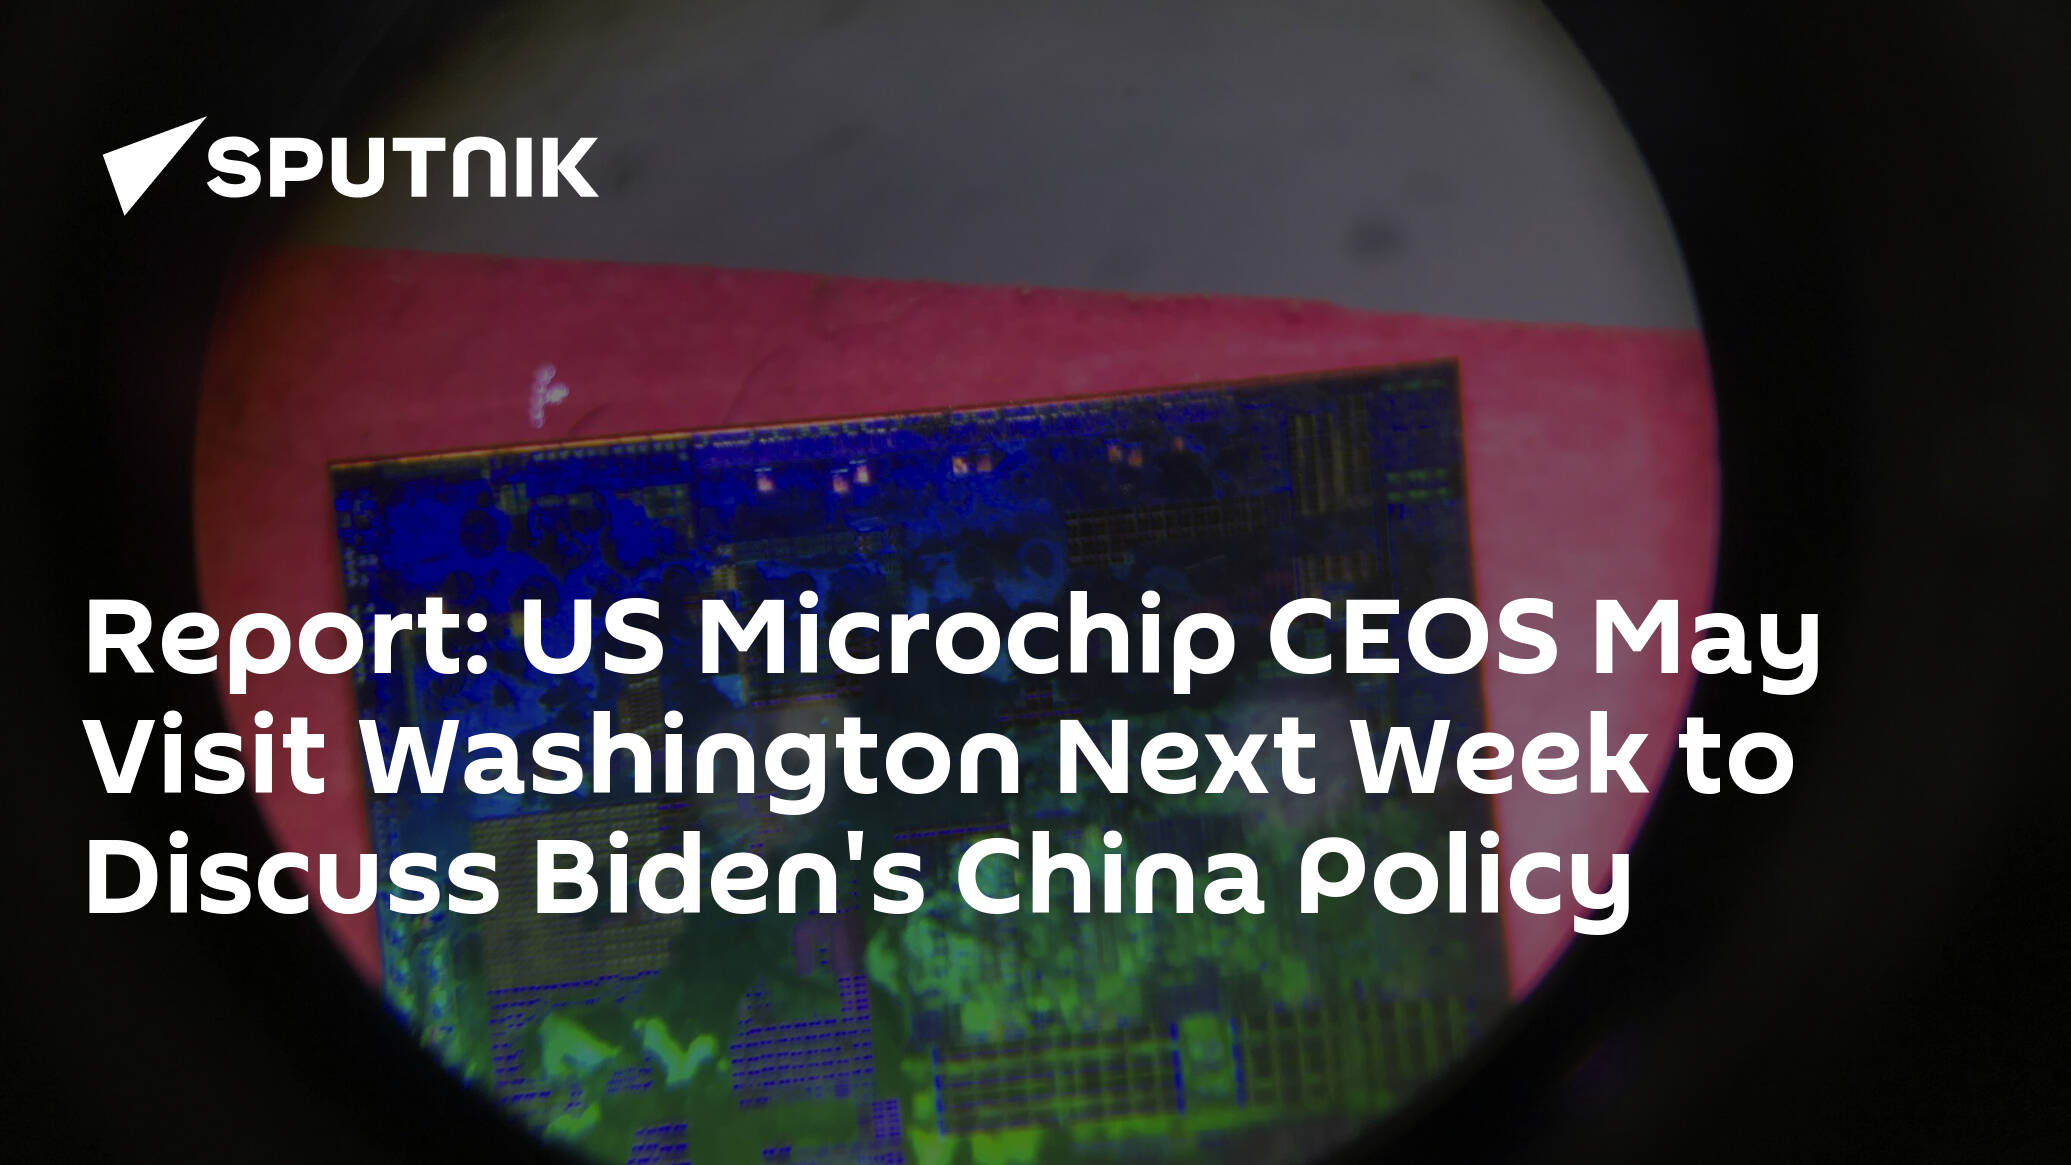 Report: US Microchip CEOS May Visit Washington Next Week to Discuss Biden's China Policy